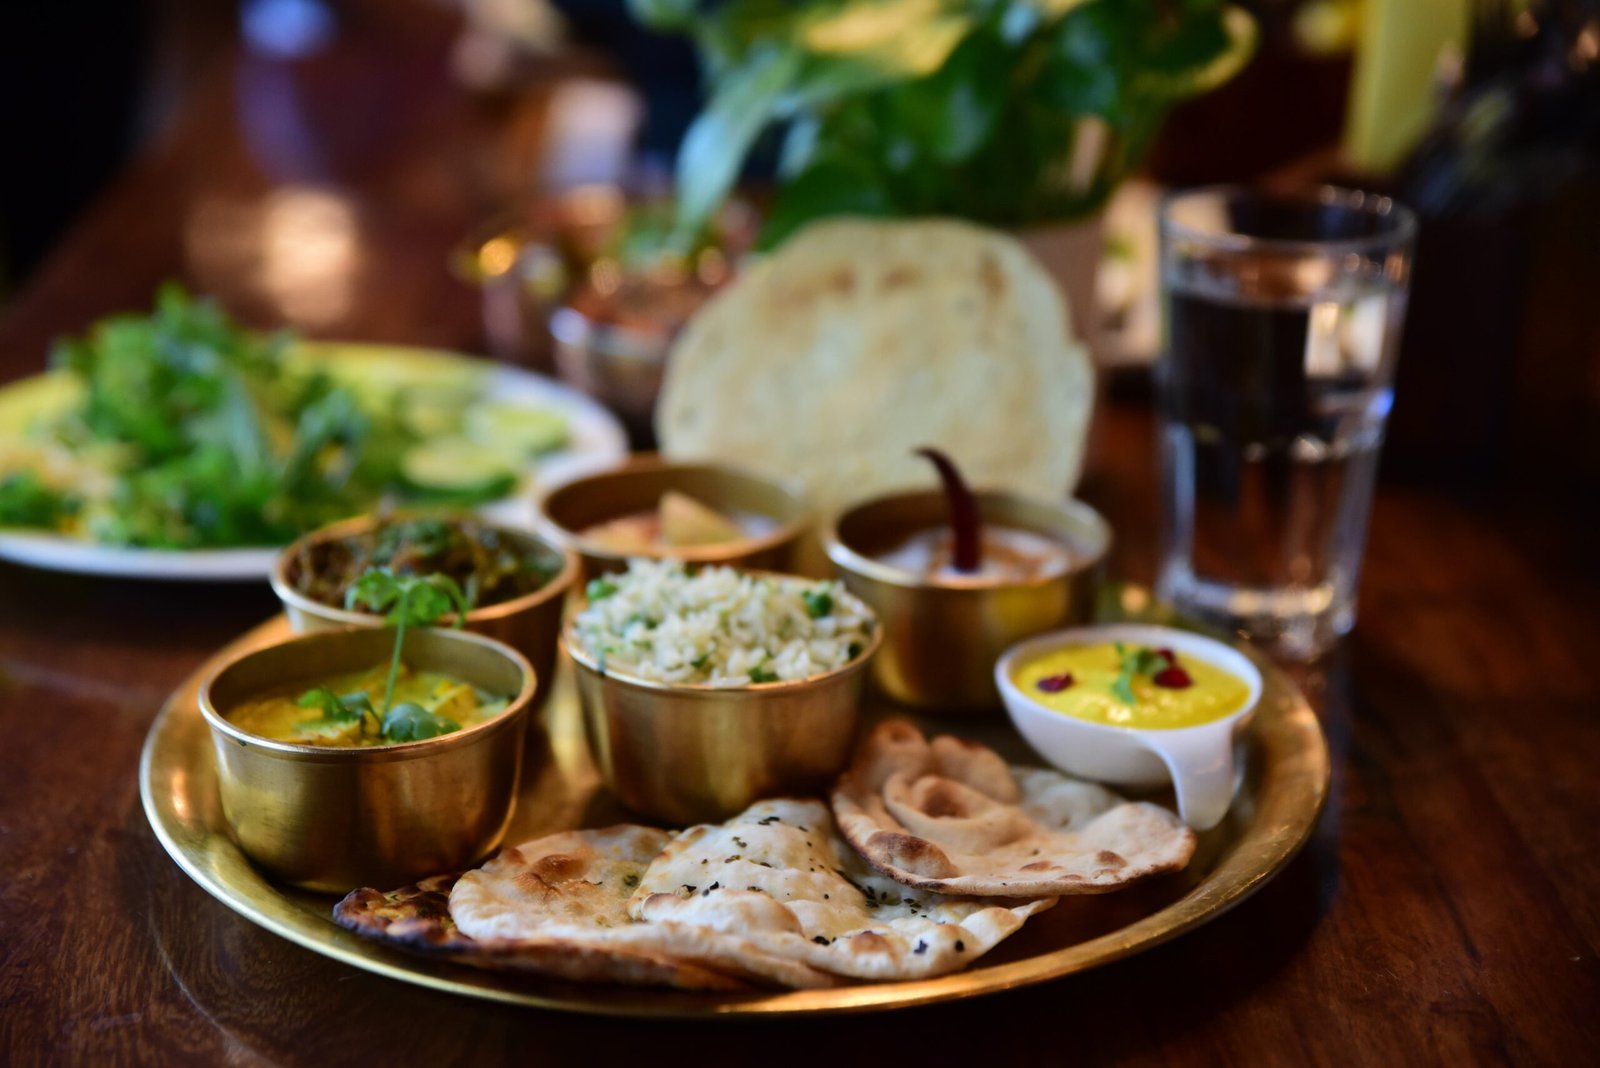 A closeup shot of an Indian tasty food called "Marwari Veg Thali" on the wooden table